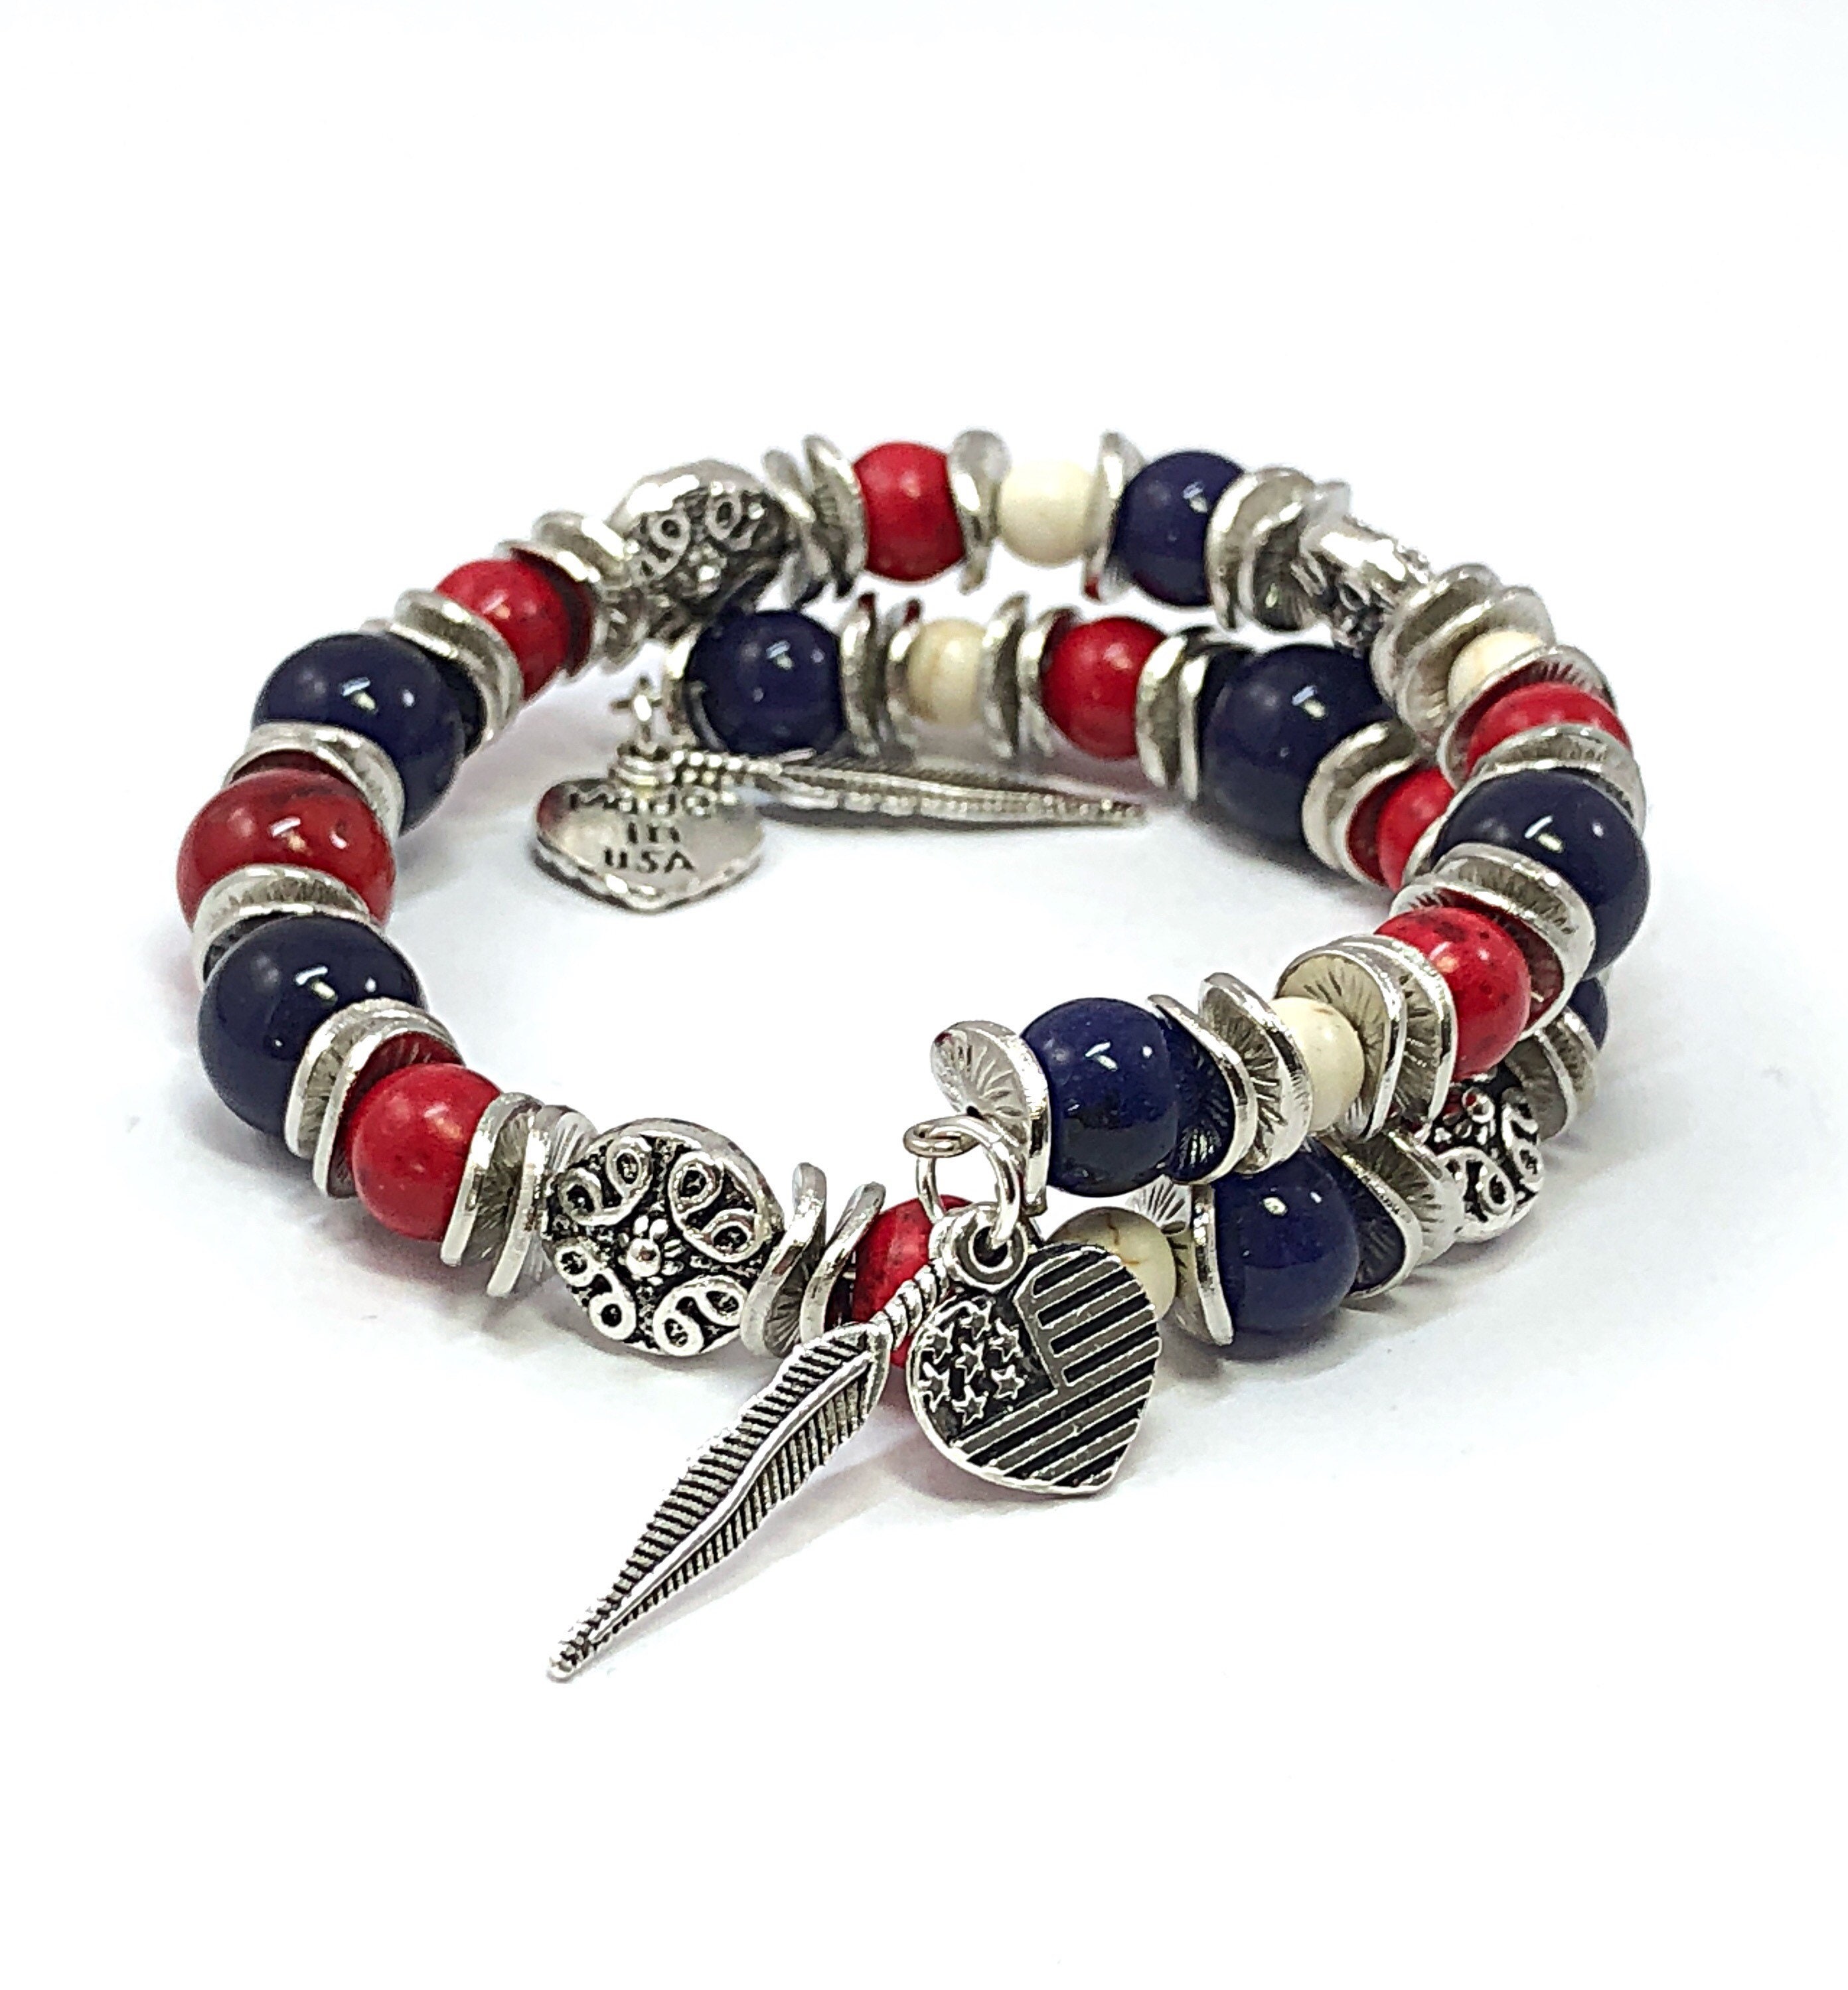 Red White and Blue jewellery Patriotic Jewellery 4th of July Accessories Cuff bracelet American Flag Bracelet Unisex jewellery